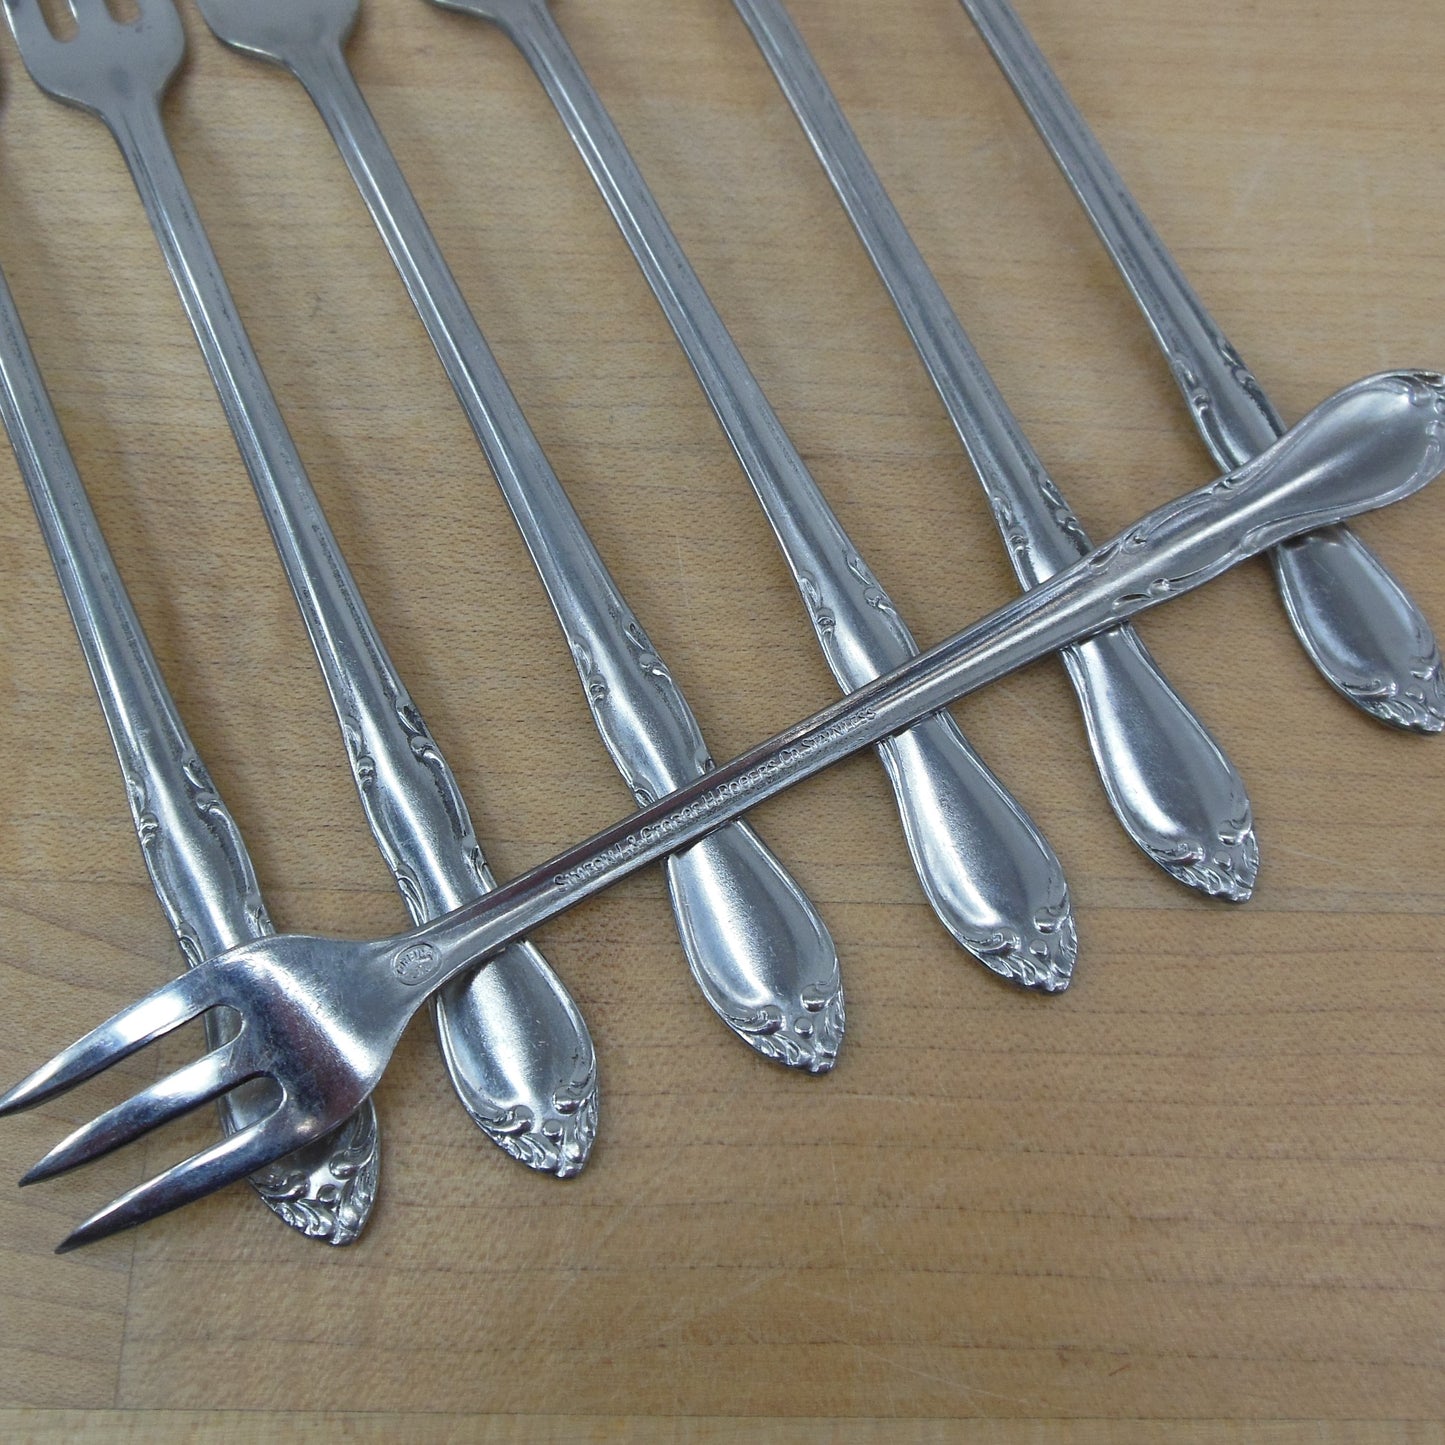 Oneida Simon L. & George H Rogers Co. Homestead Stainless Cocktail Seafood Forks used